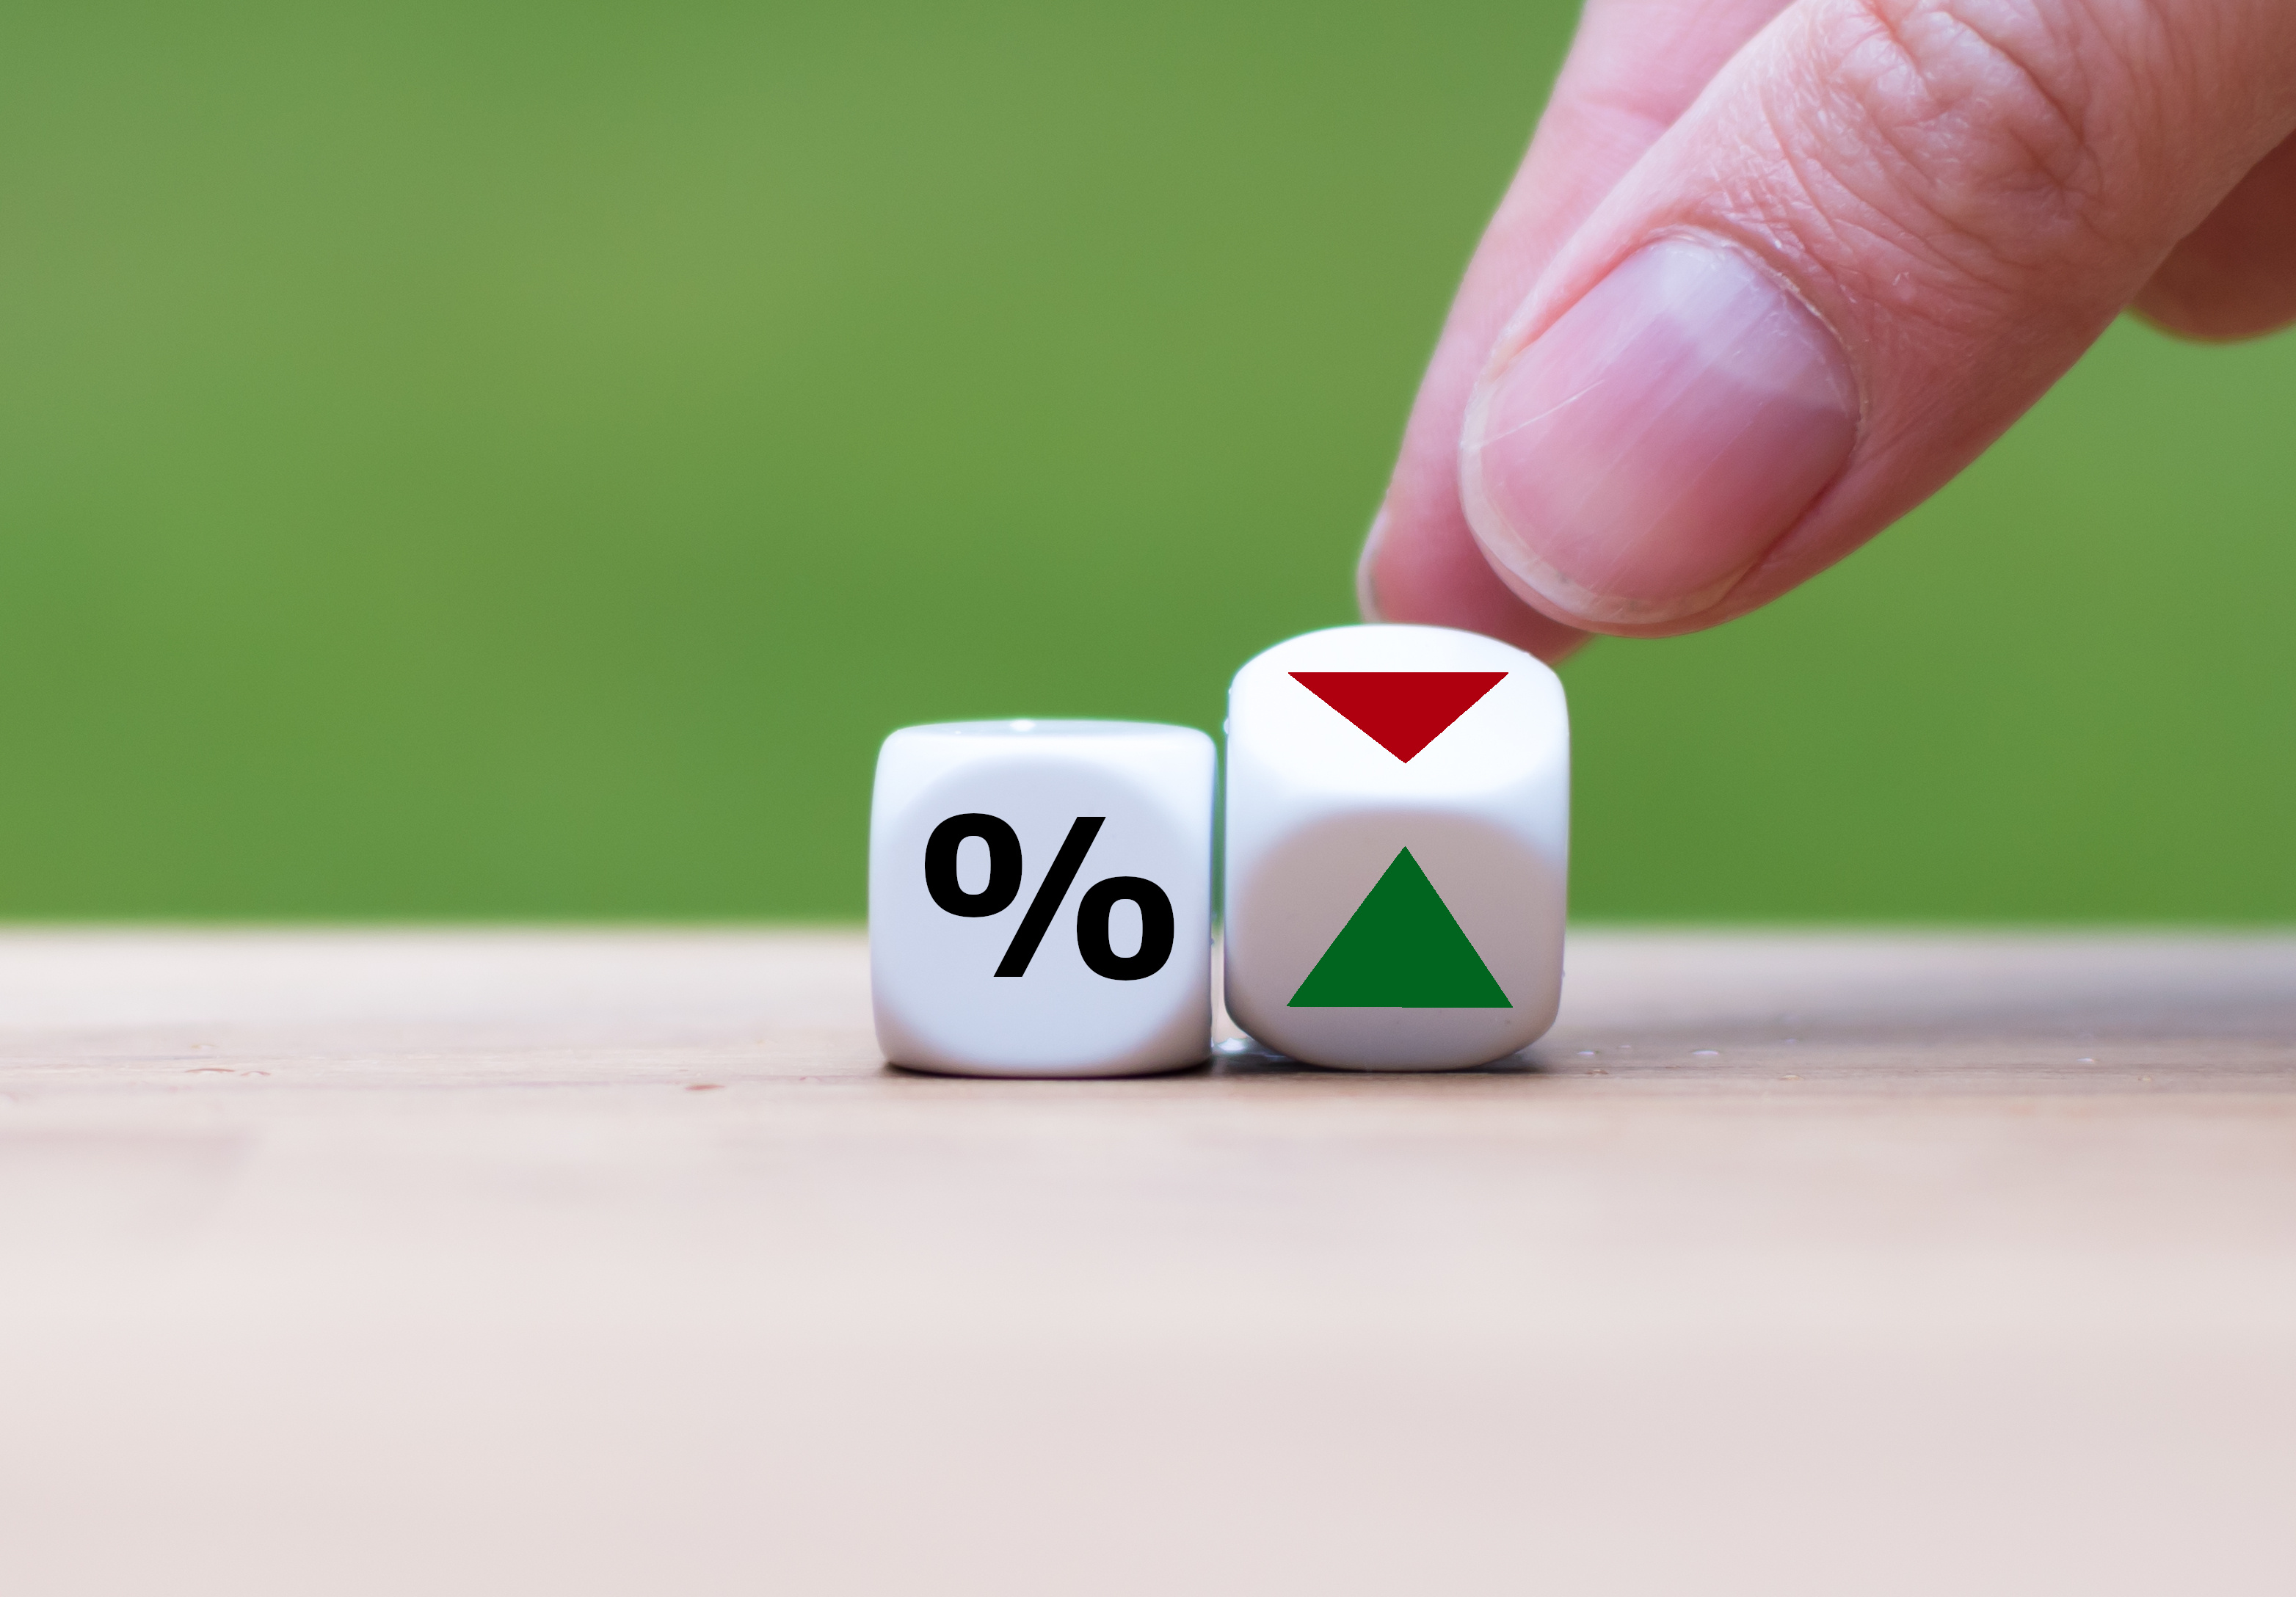 Hand moving two dice, one with percentage sign and other with a red and green arrow.